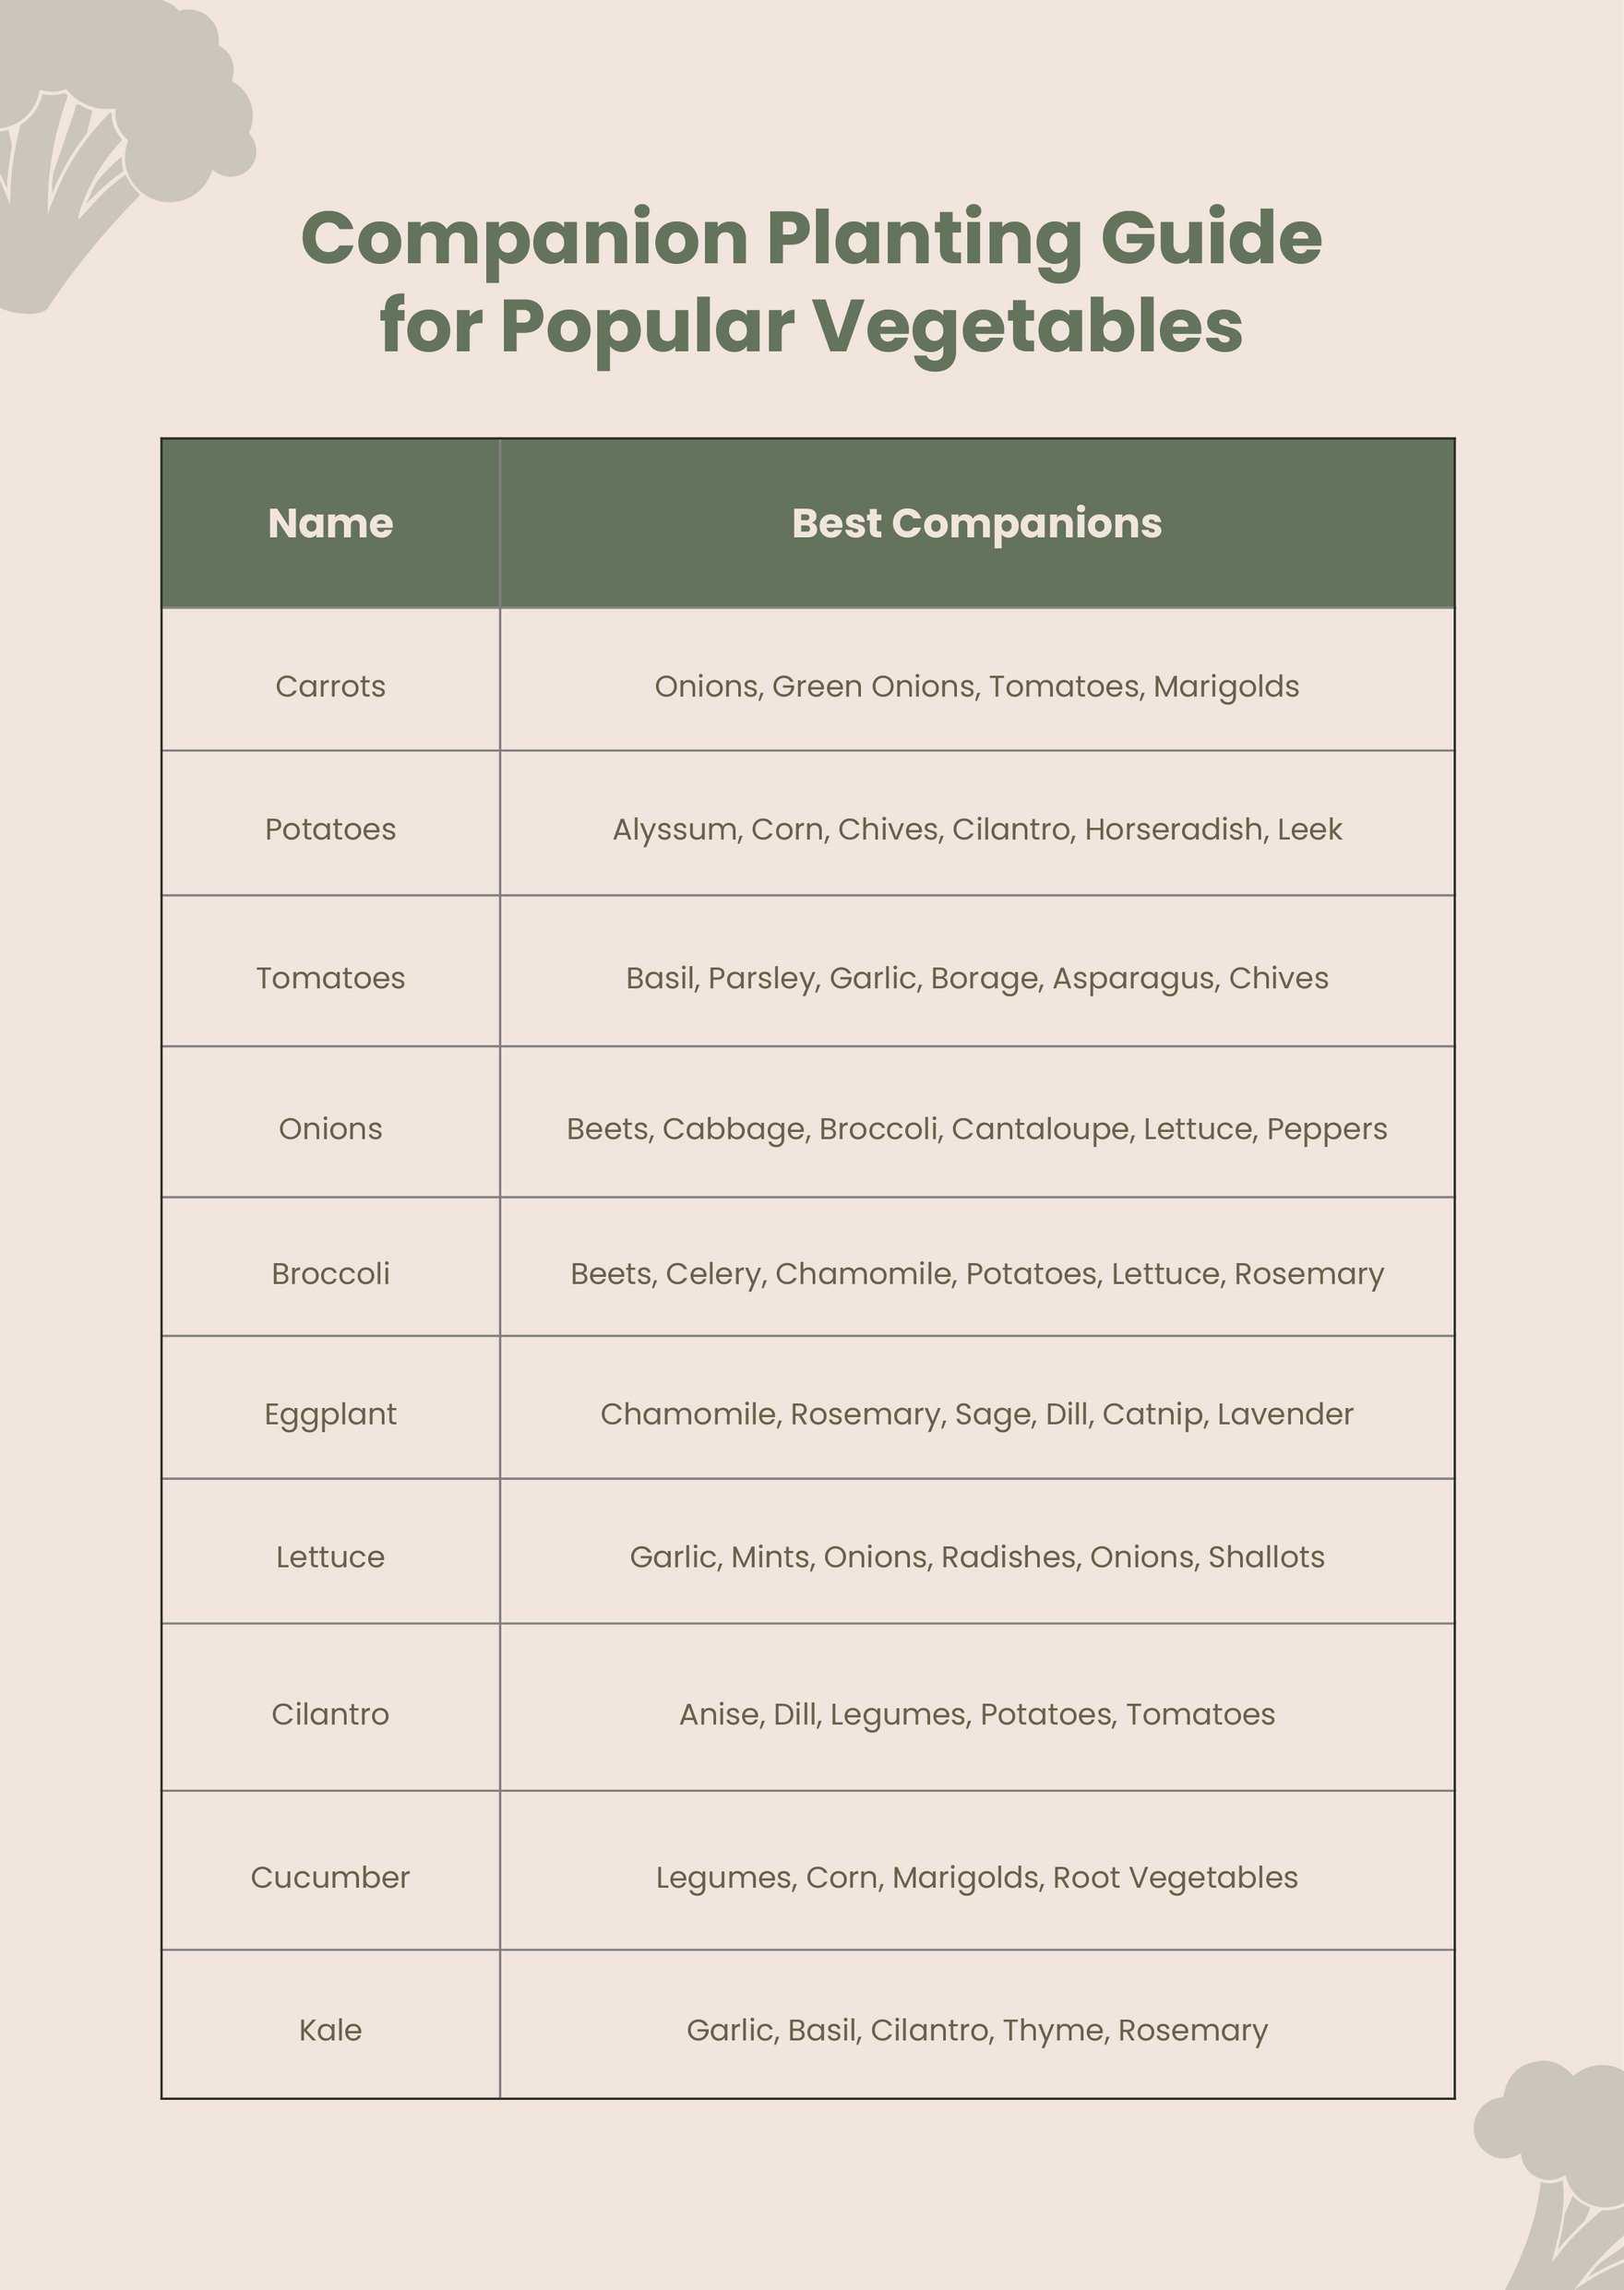 Companion Planting Chart For Vegetables And Flowers in PDF, Illustrator